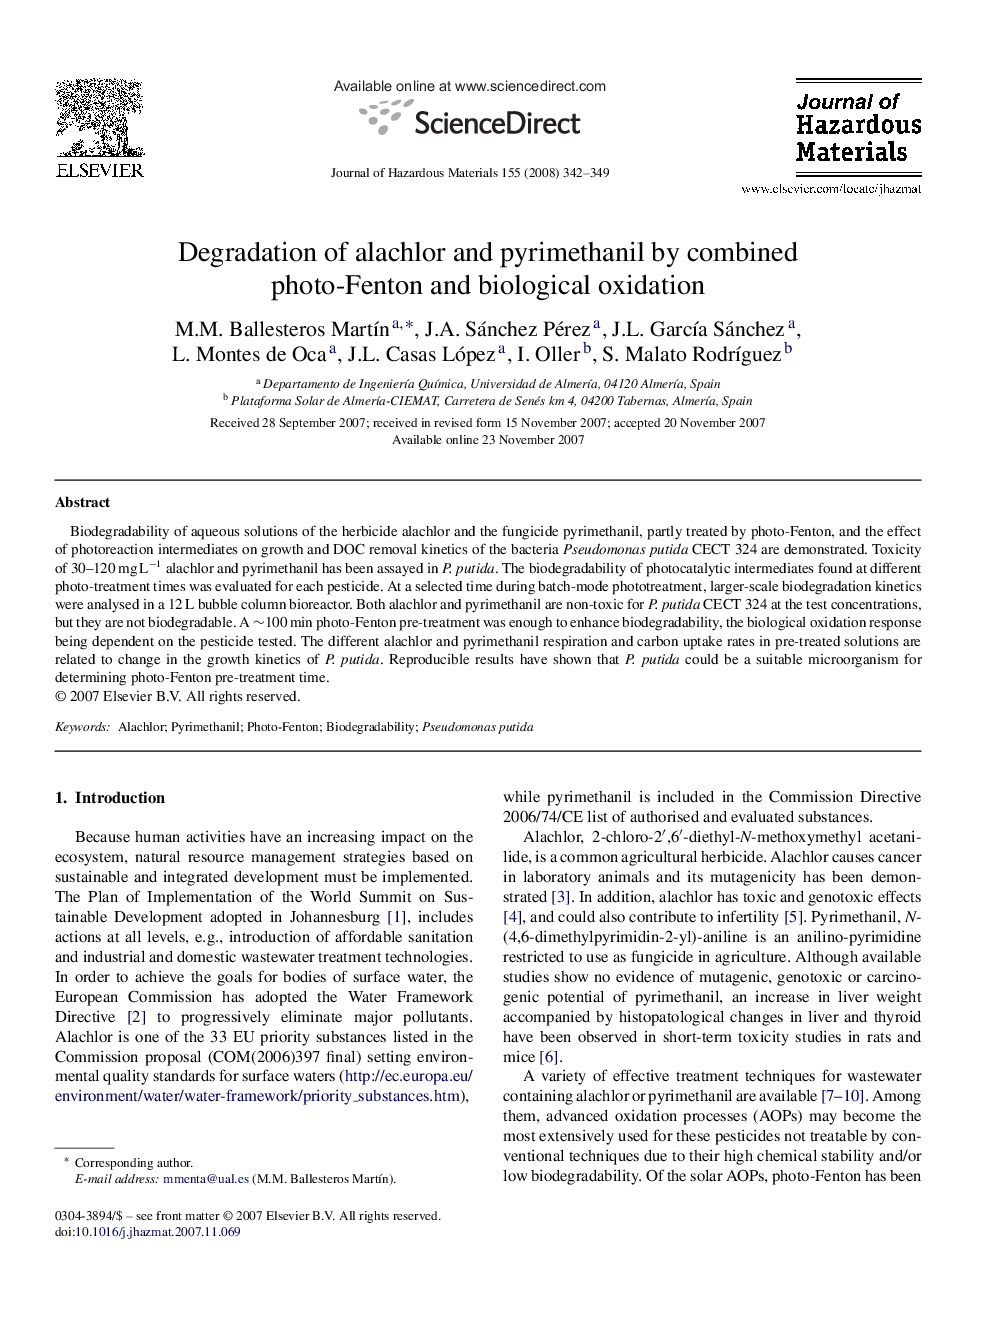 Degradation of alachlor and pyrimethanil by combined photo-Fenton and biological oxidation